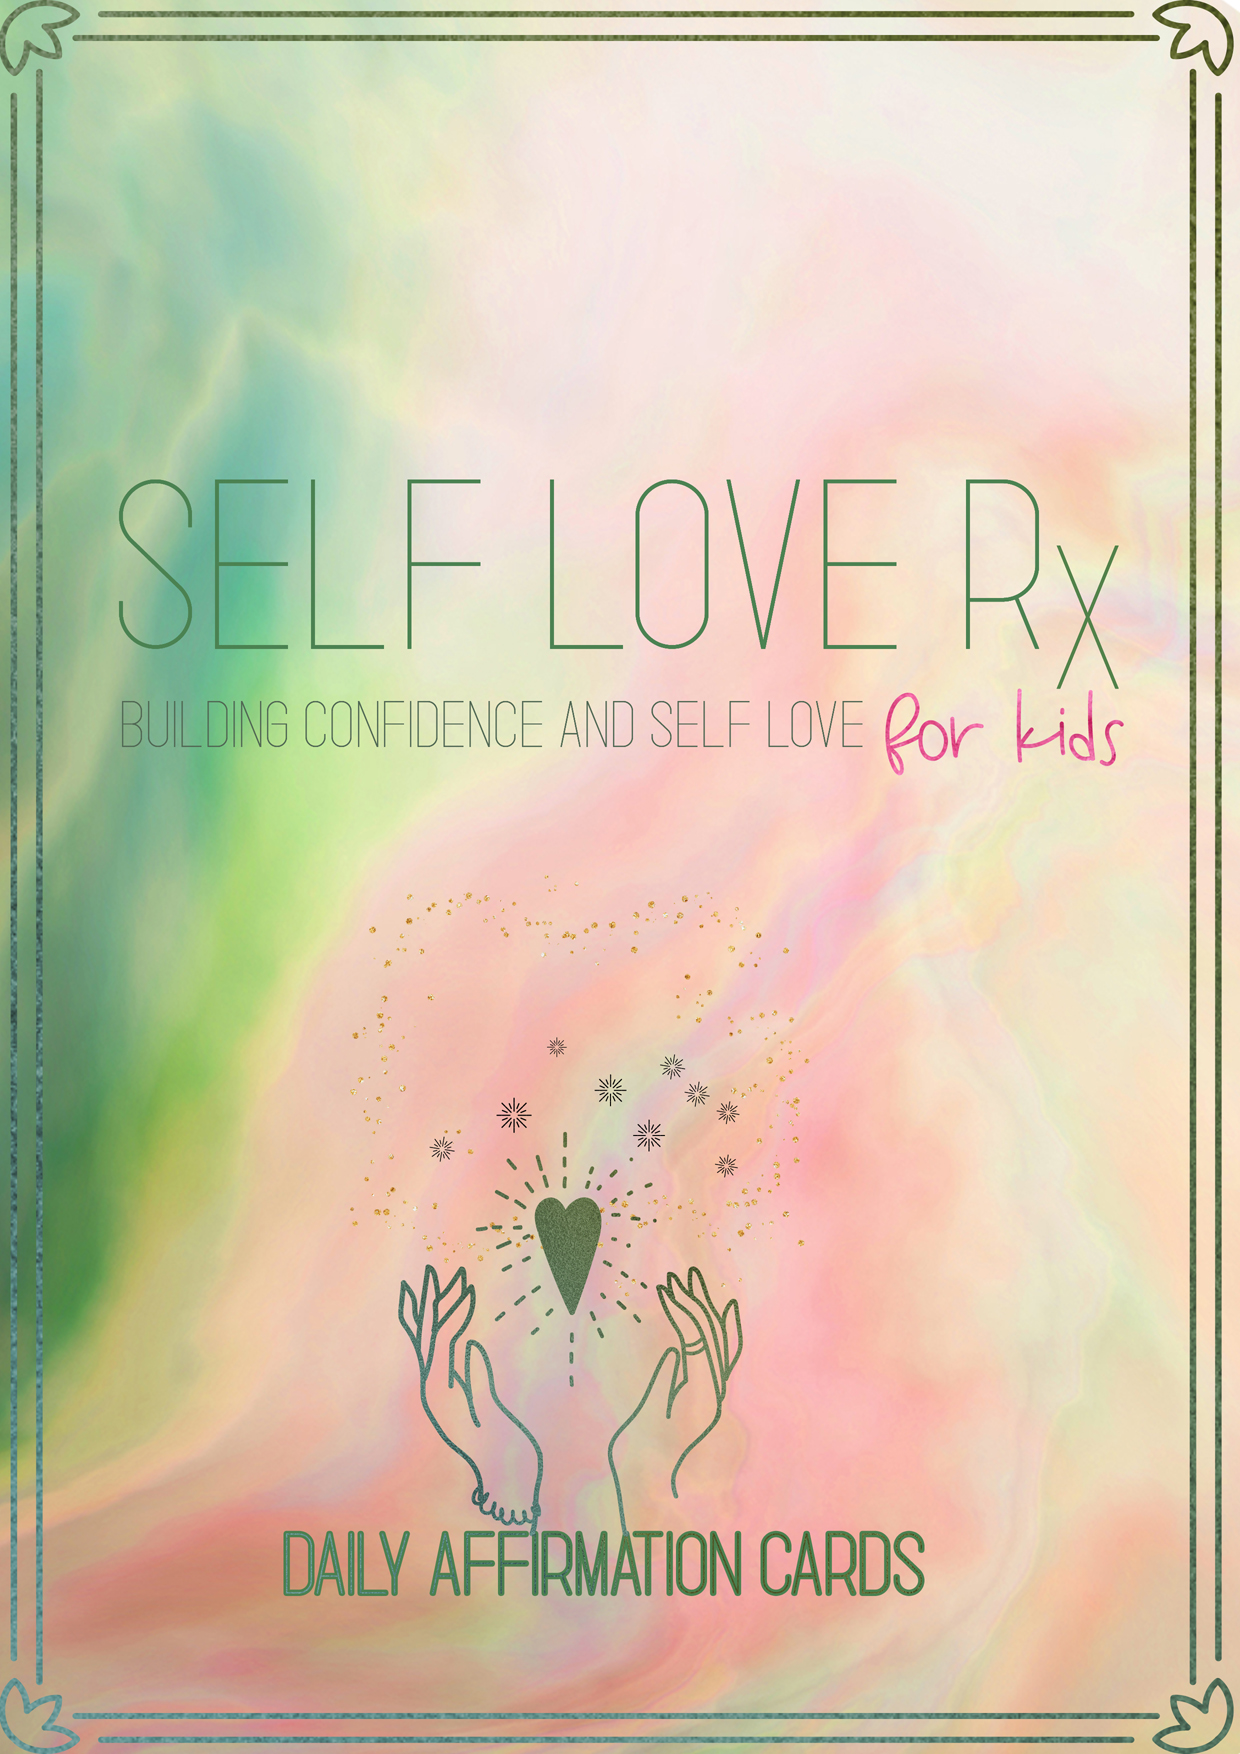 daily affirmation card from the Self-love Rx for kids card deck - teaching children how to love and value themselves | the wisdom podcast season 1 episode 9 |